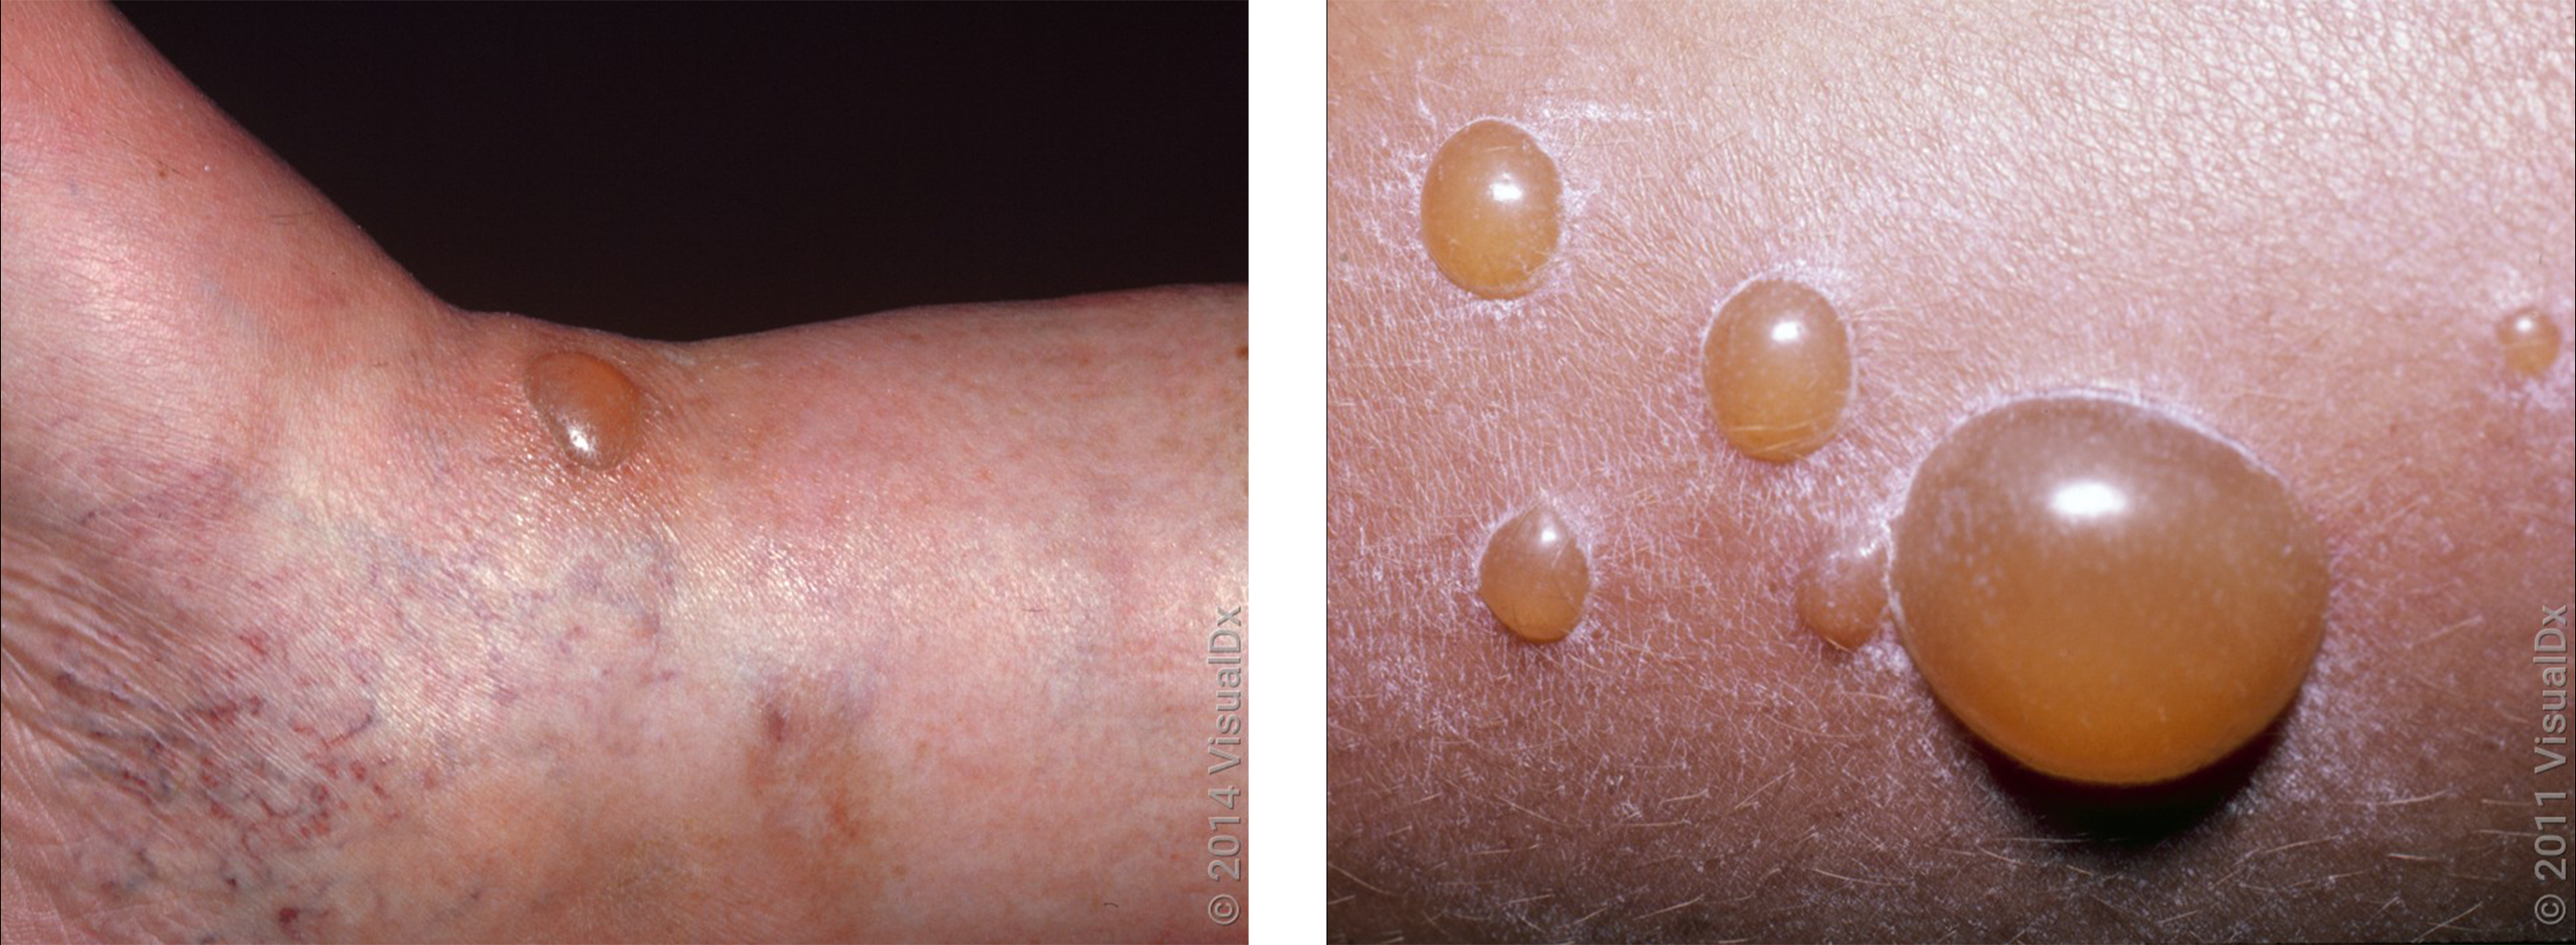 Left: A small, white blister on the skin. Right: Large blisters on the skin in an autoimmune rash.